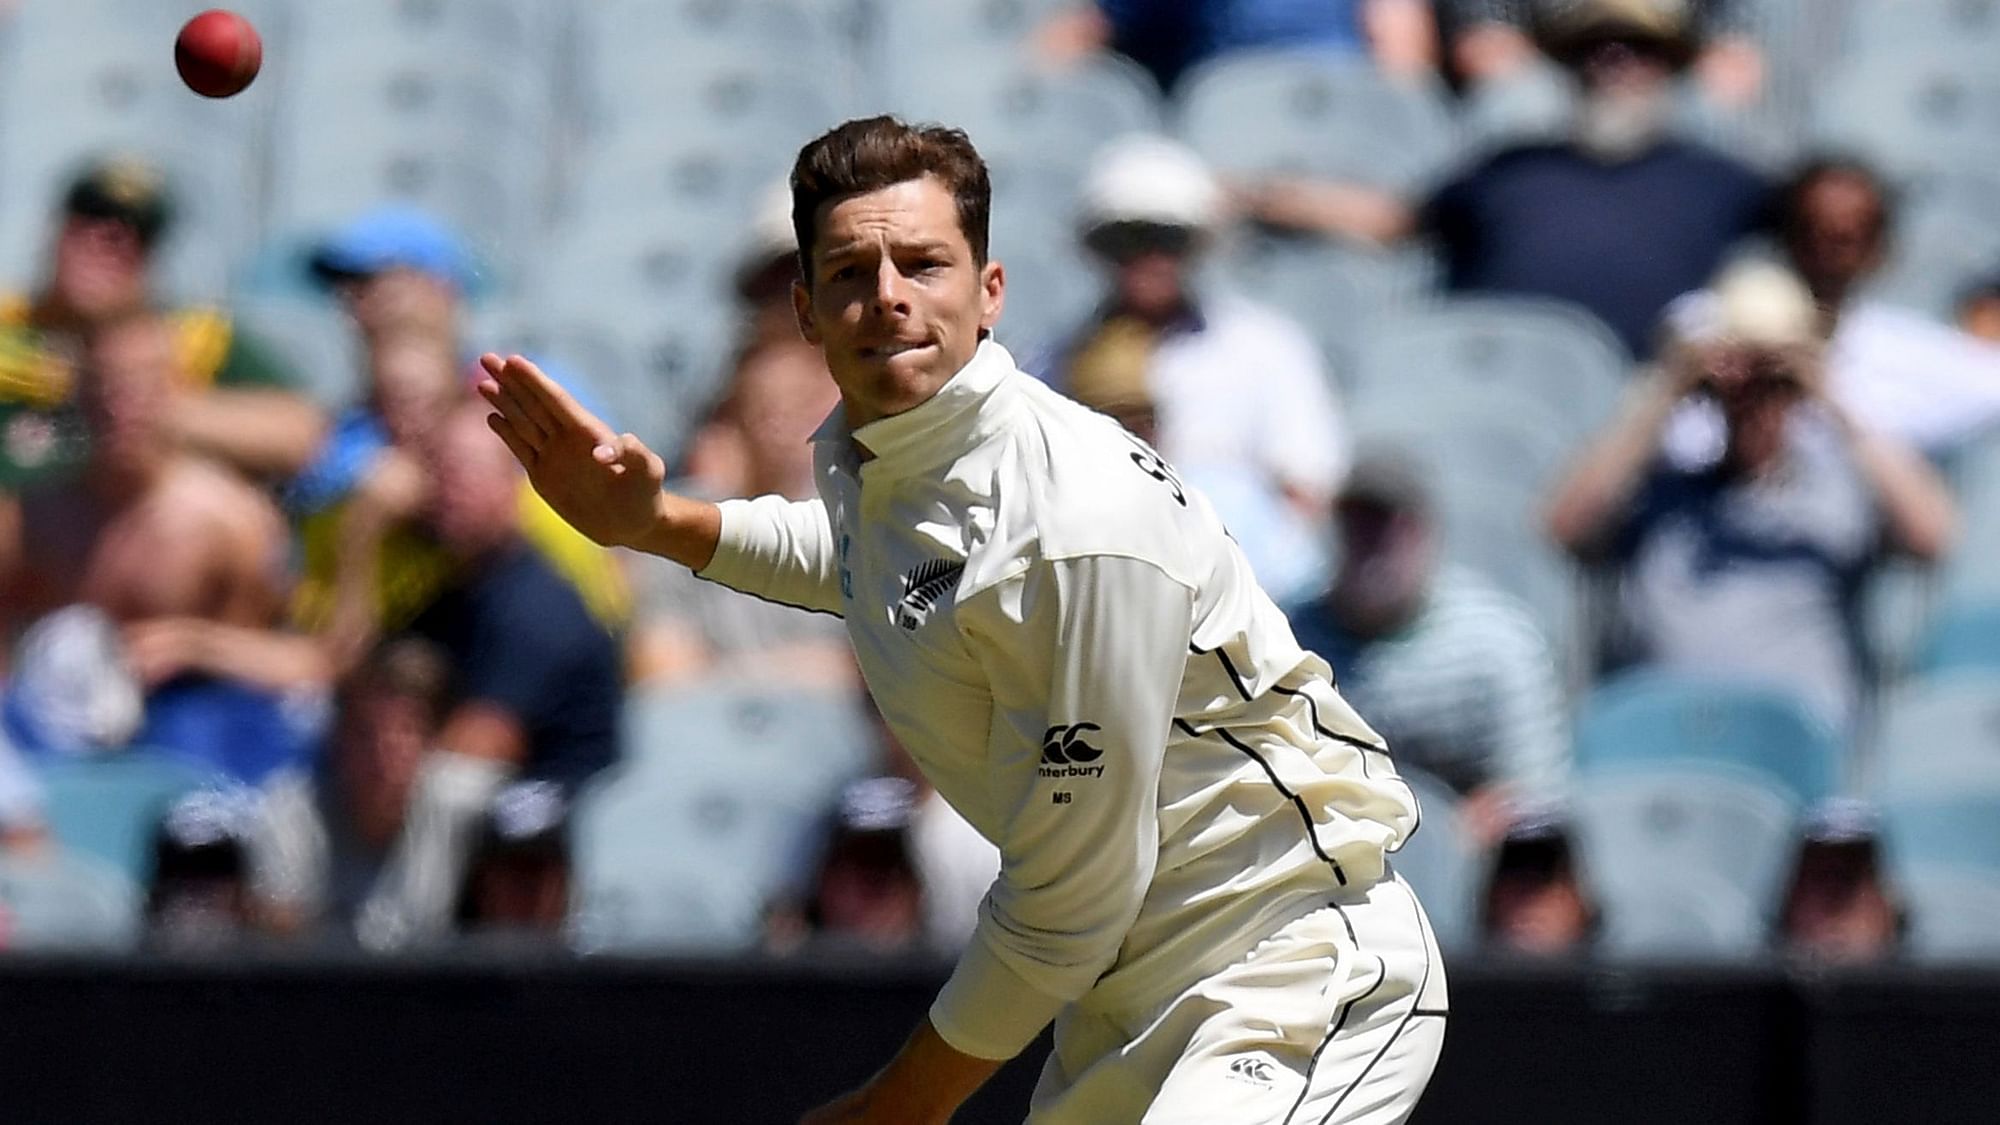 Mitchell Santner bowled 20 overs in the first innings but failed to pick a wicket while giving away 82 runs.